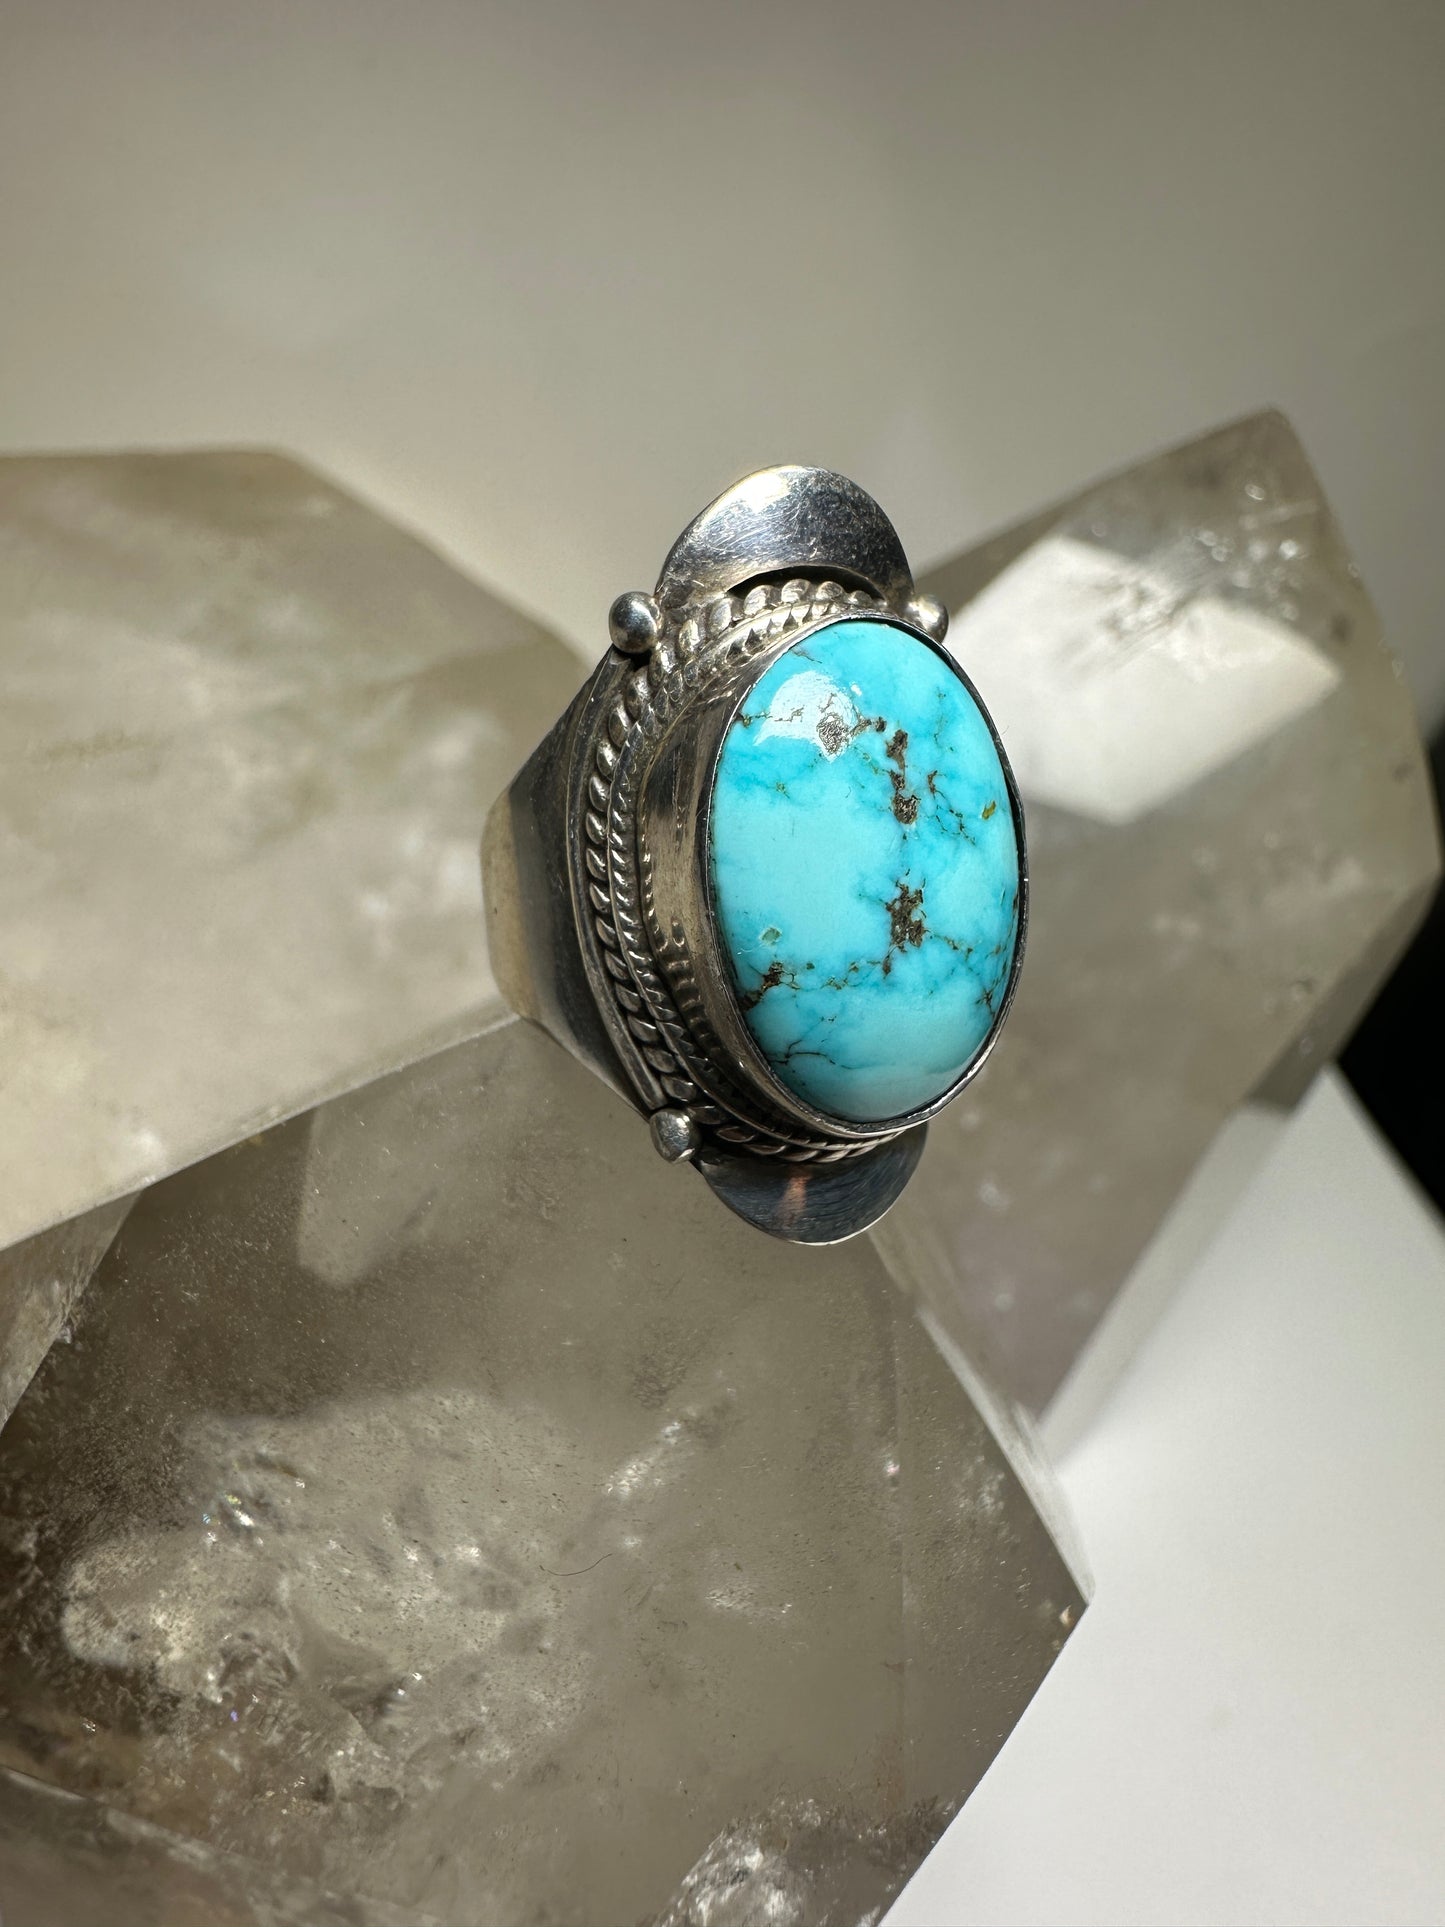 Turquoise ring cigar band boho size 6 sterling silver women